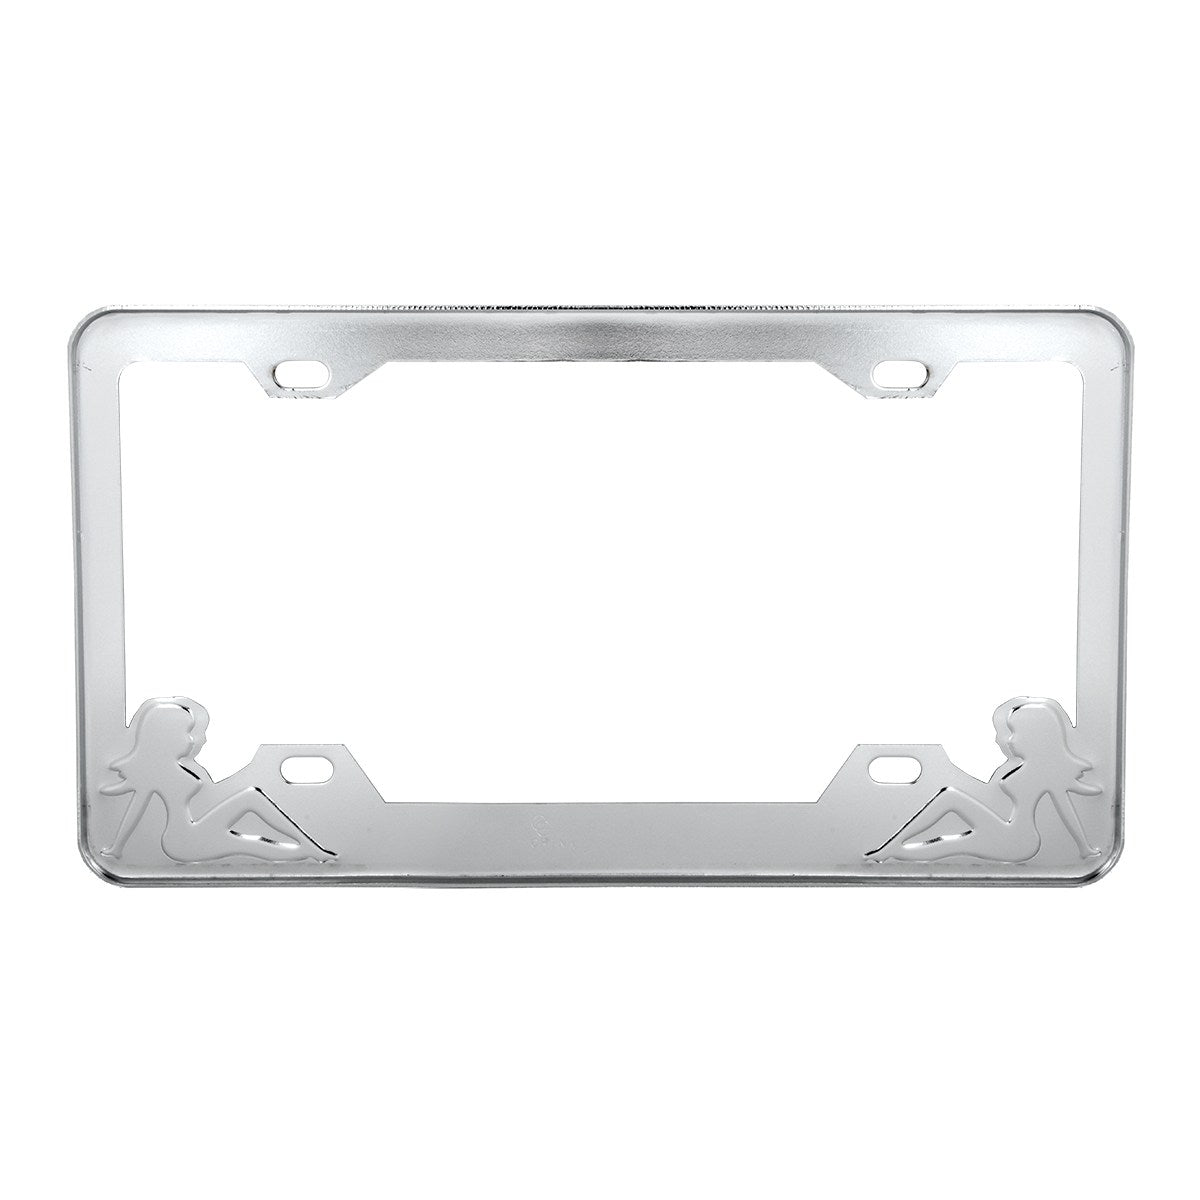 License Plate Frame With Sitting Lady Silhouettes in Red